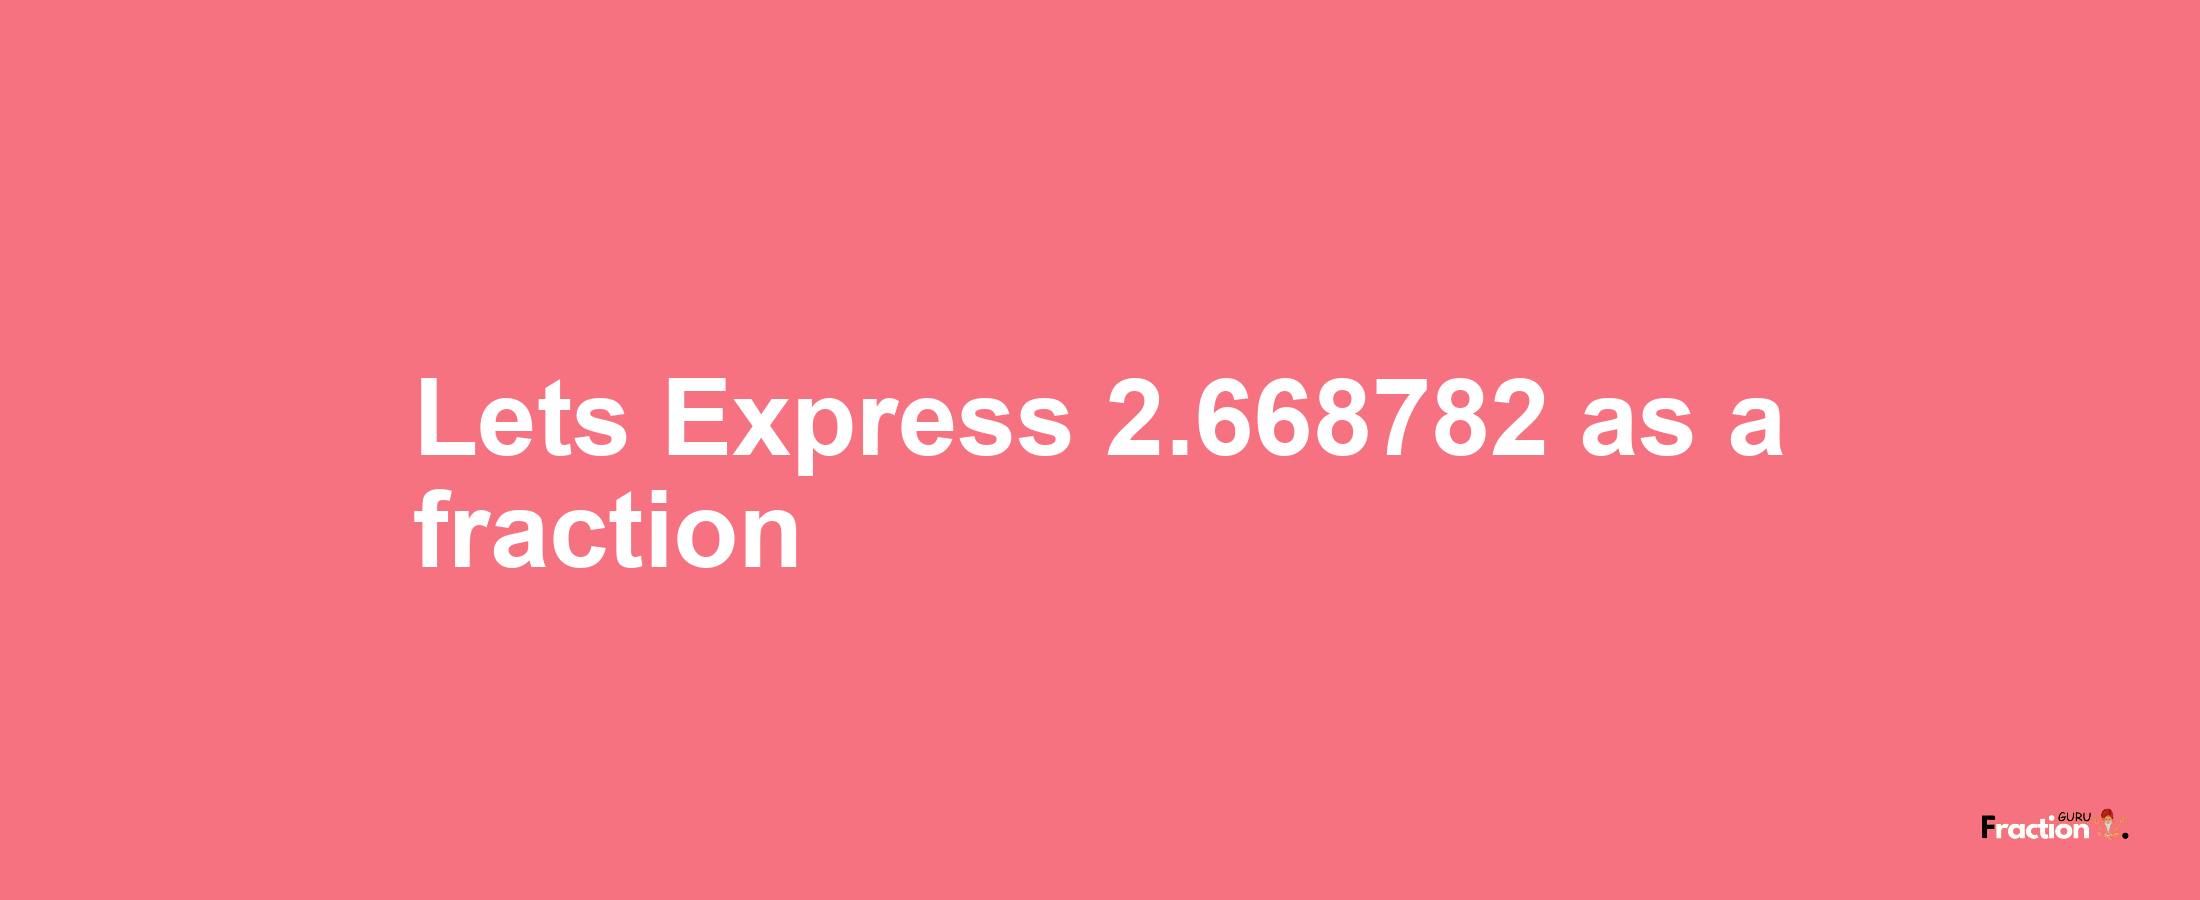 Lets Express 2.668782 as afraction